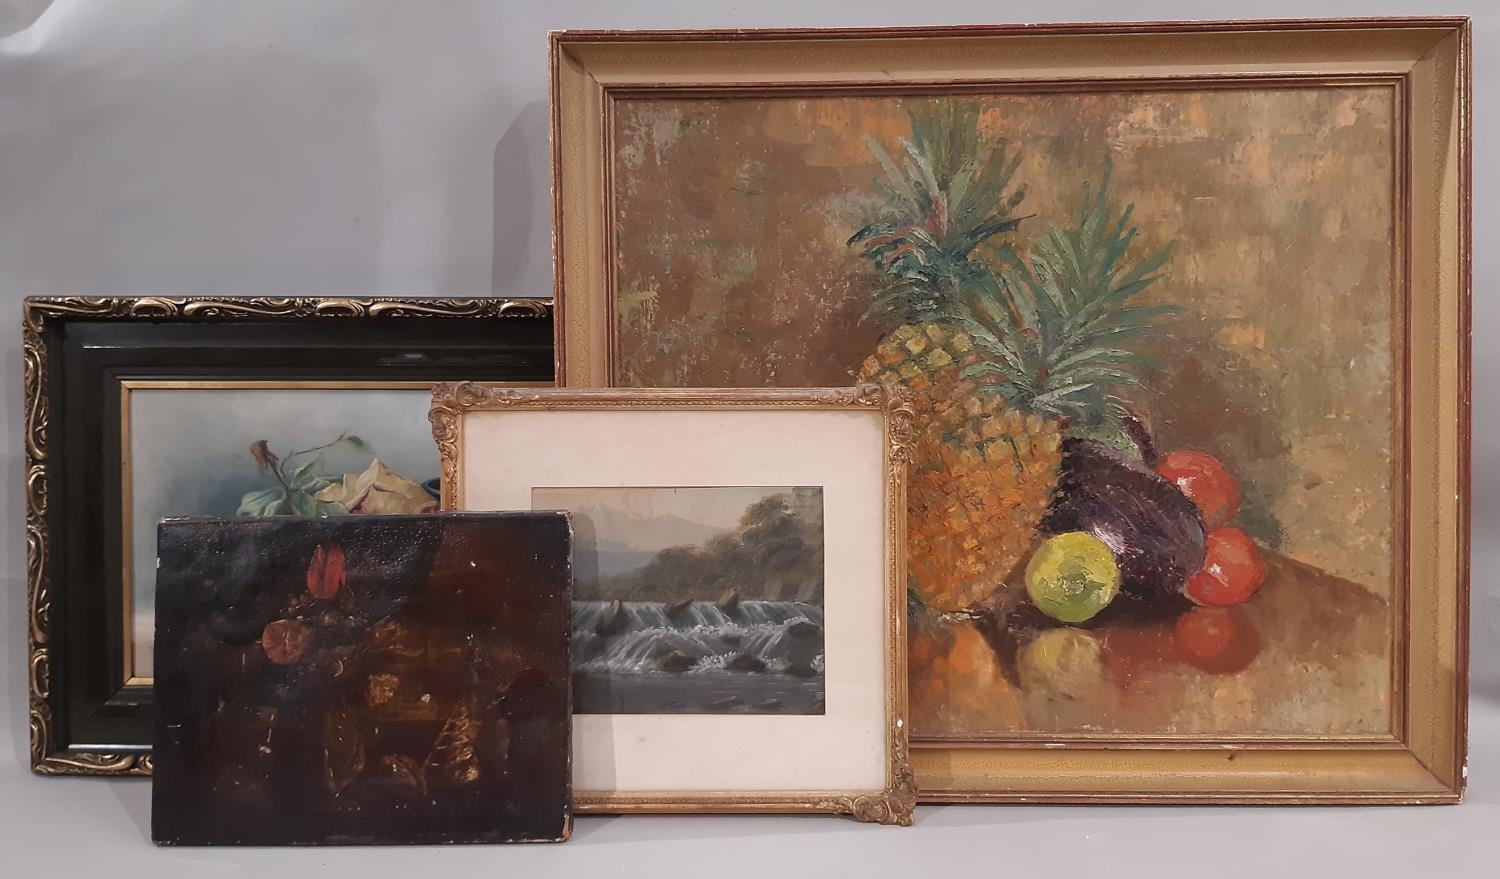 Three still life oil paintings and a watercolour: A. Rothwell - Still life with fruit, oil on